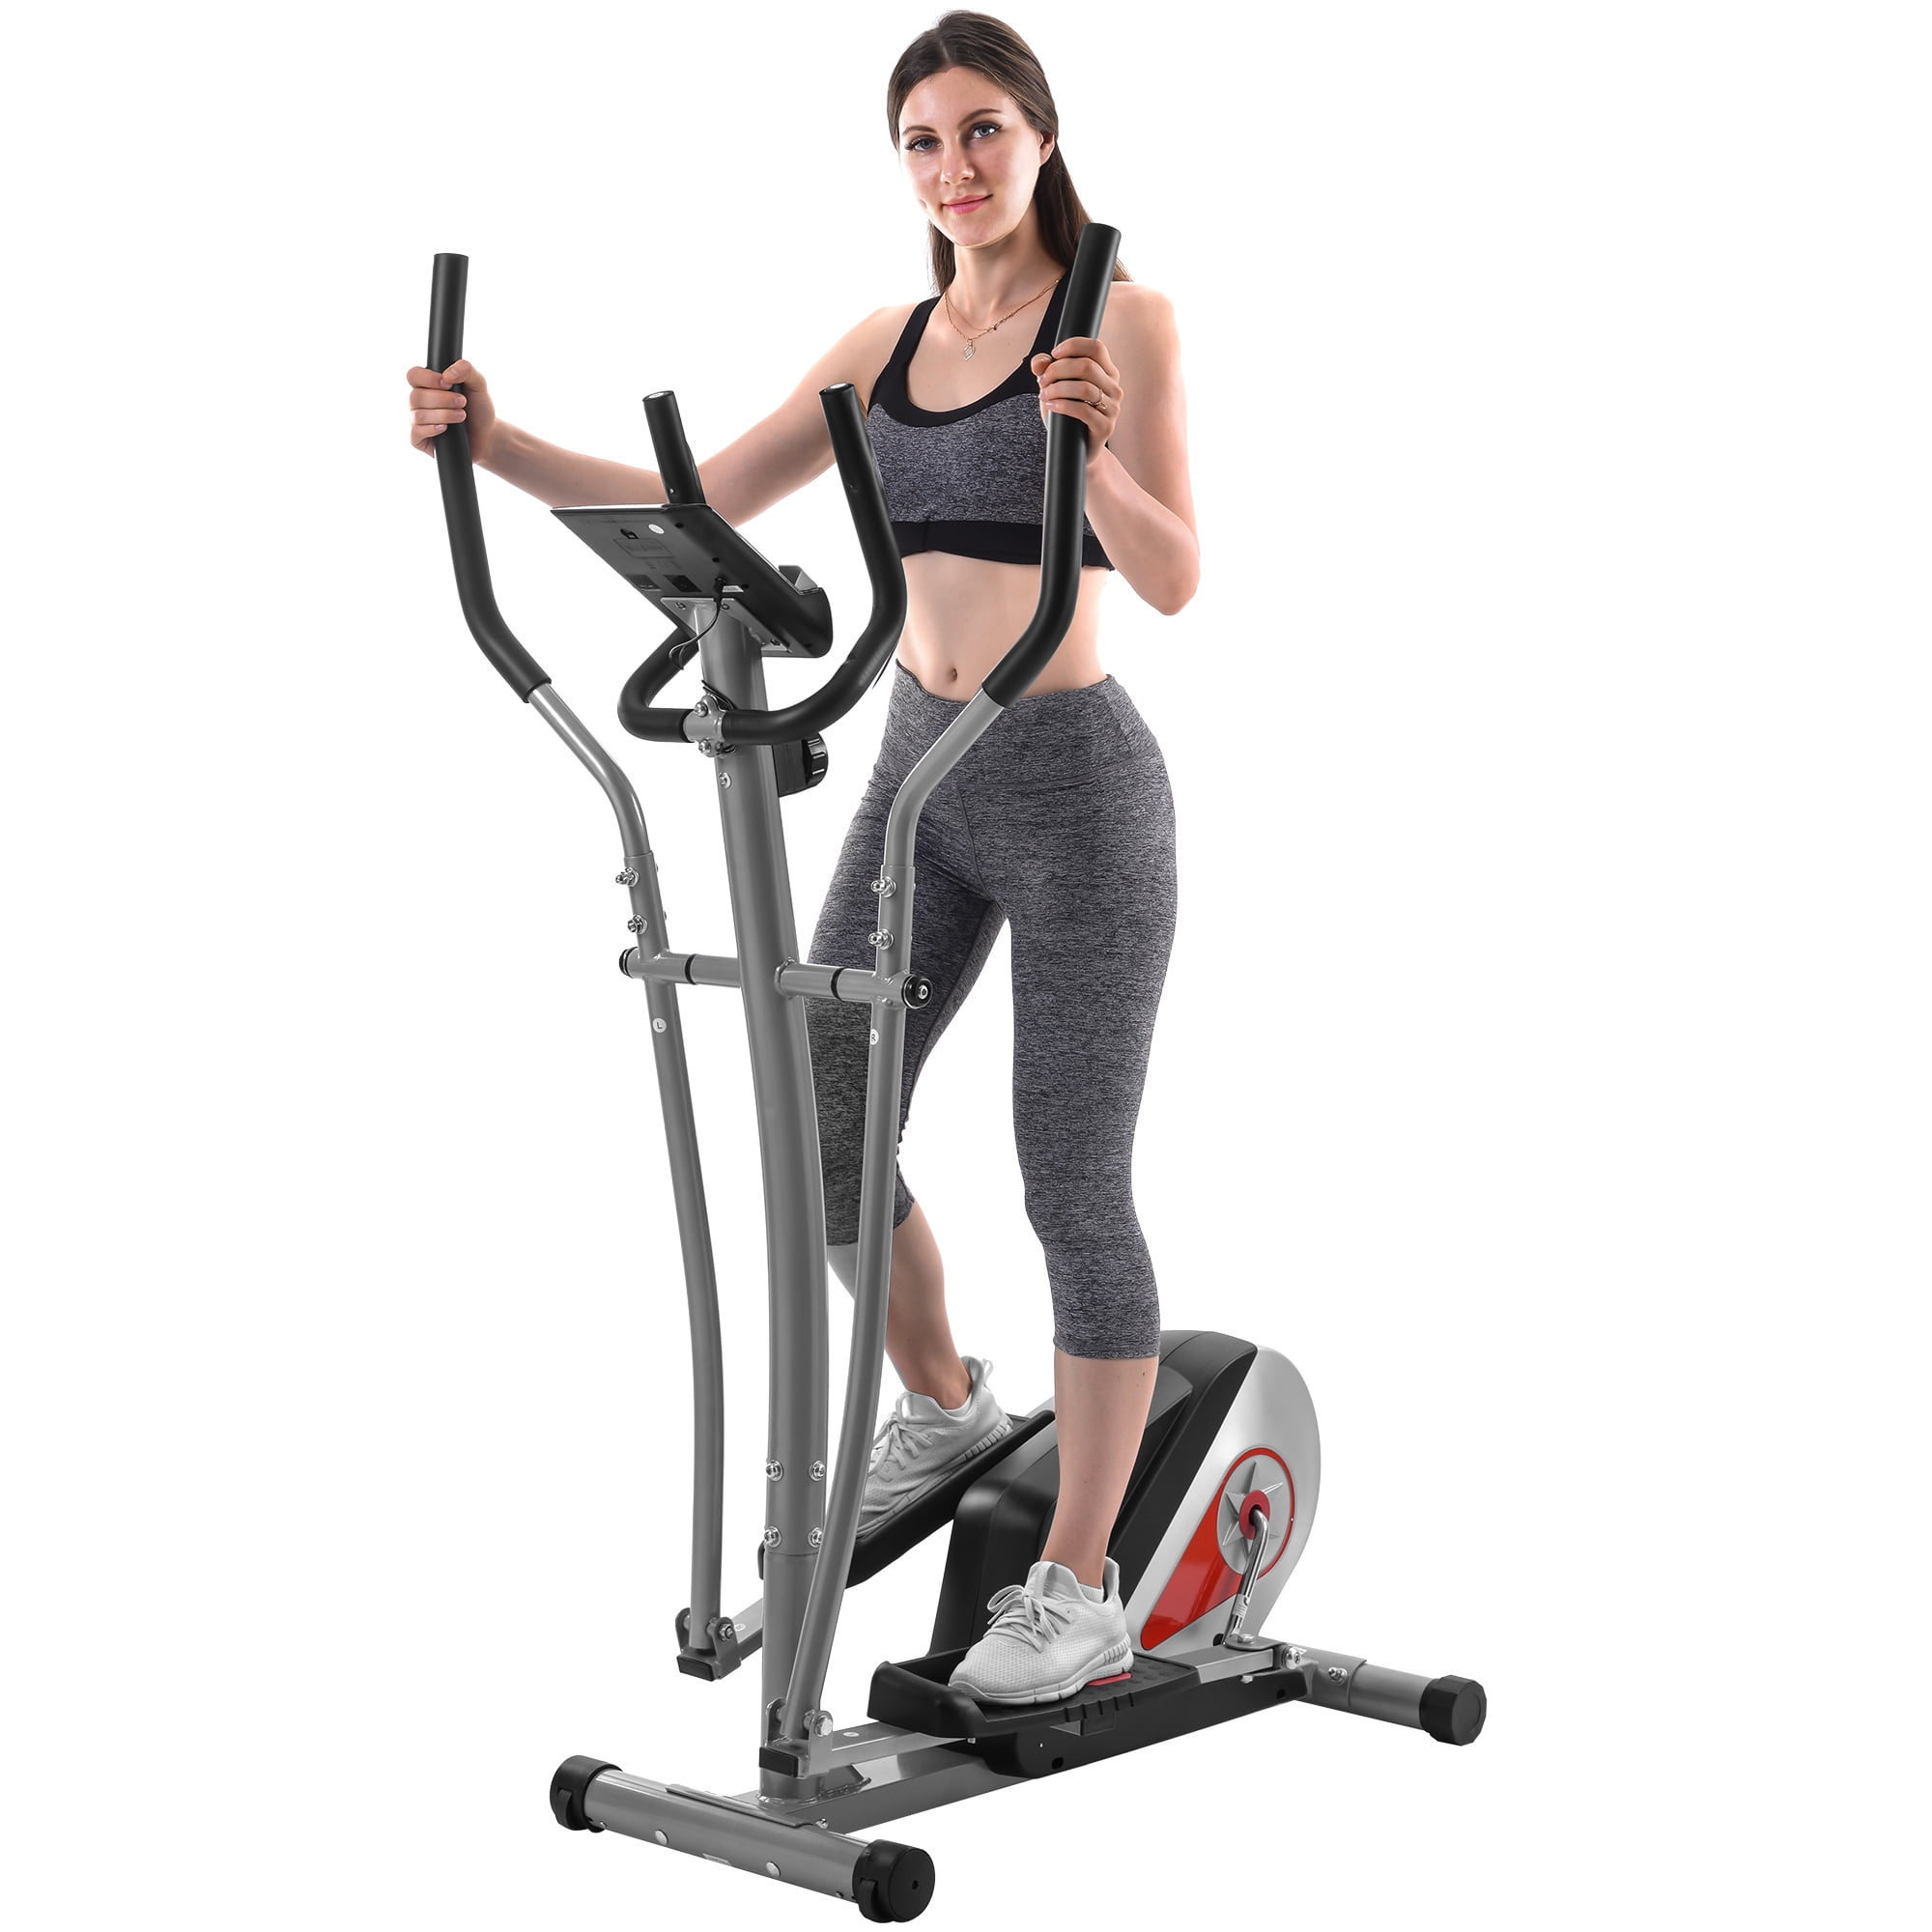 Elliptical Exercise Machine for Home Use 350LB Weight Limit Cross Trainer with LCD Monito Pulse Rate Grips and 8 Level Magnetic Resistance Smooth Quiet Driven for Home Gym 